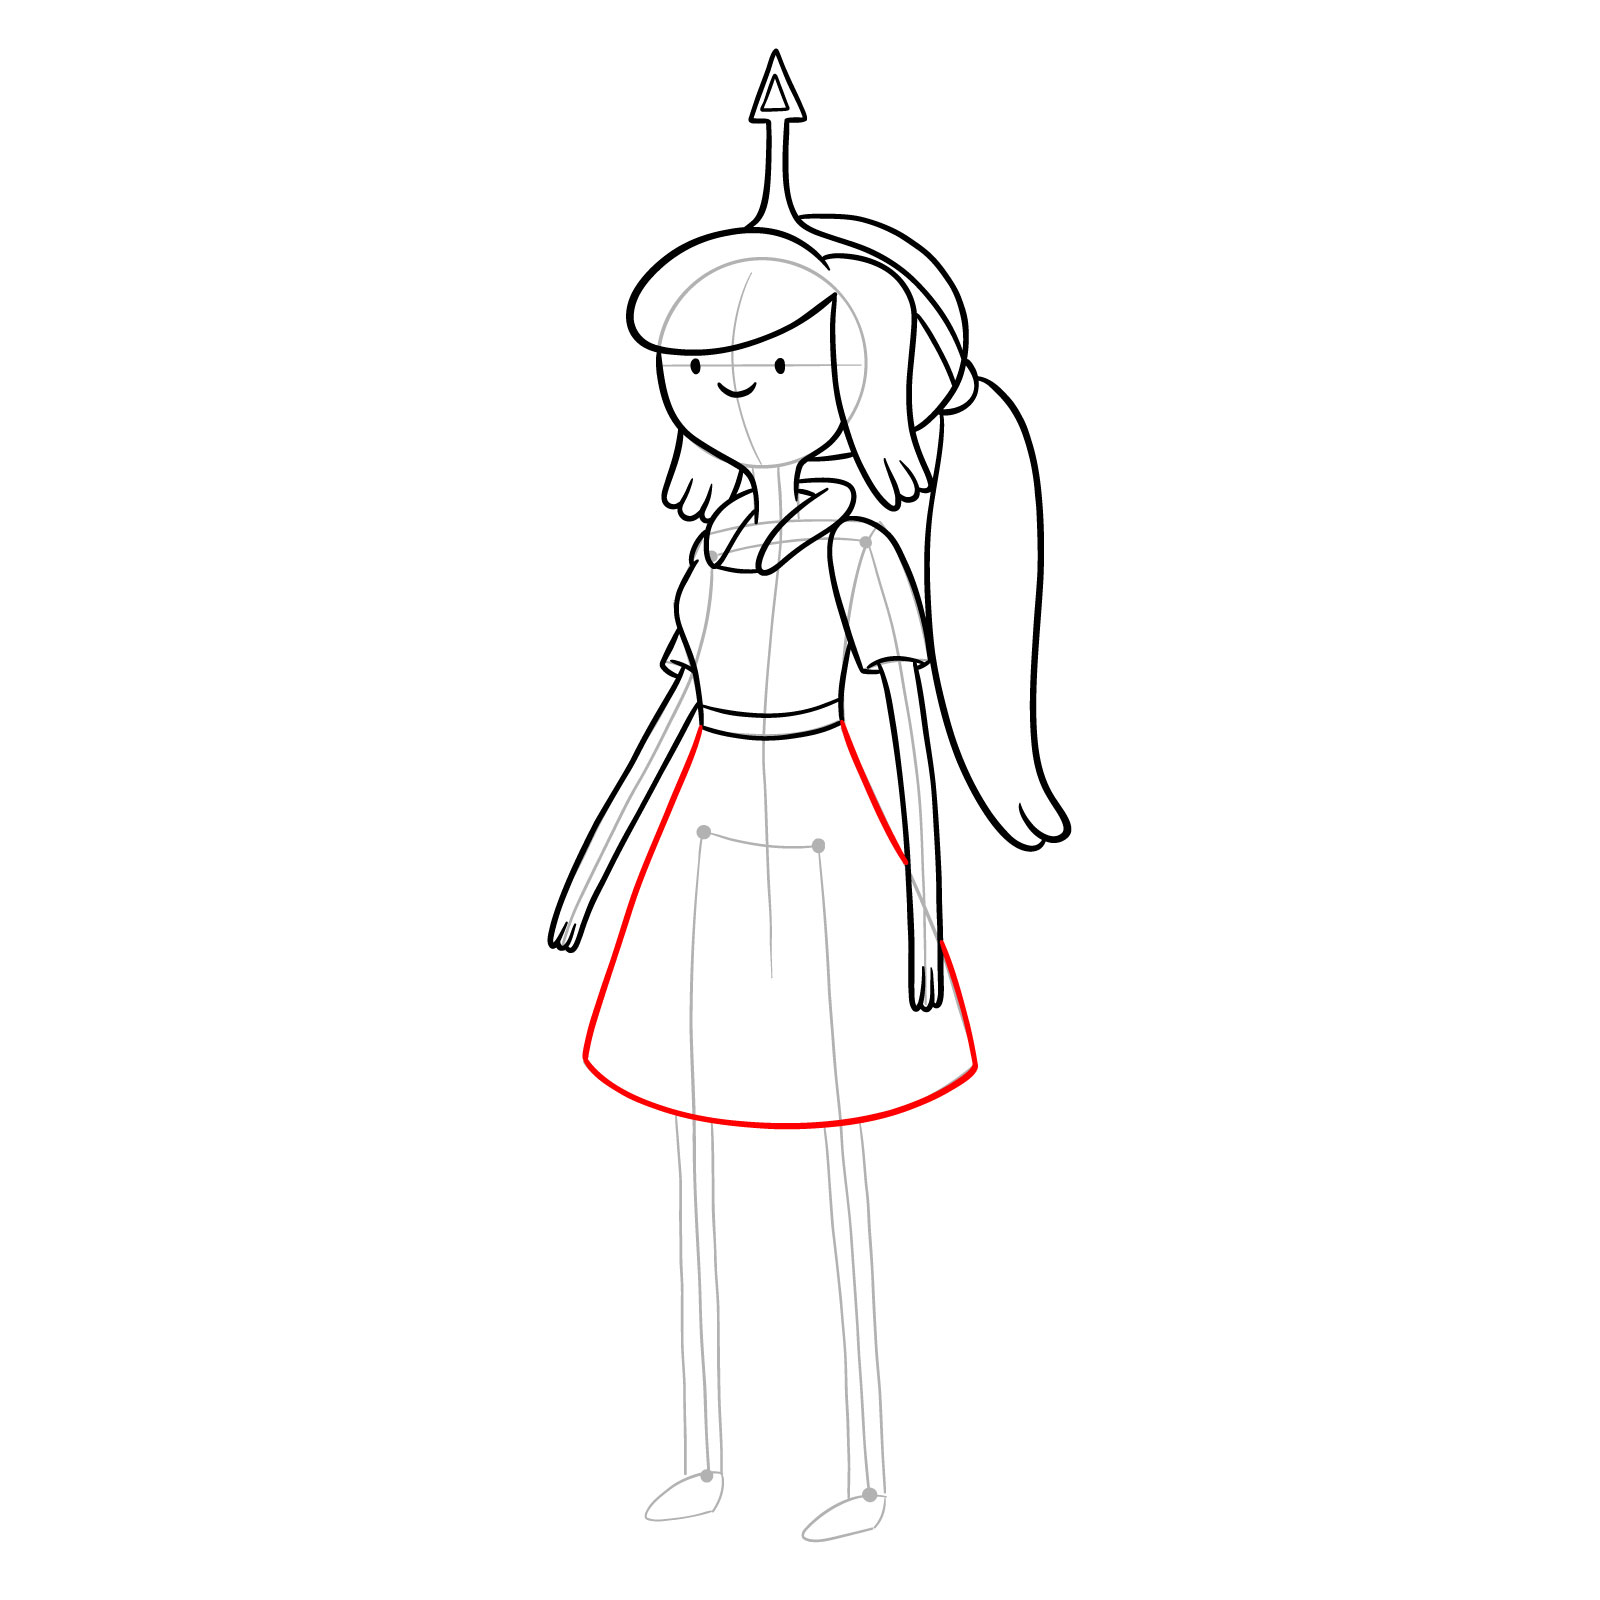 How to draw Princess Chewypaste from Adventure Time - step 19